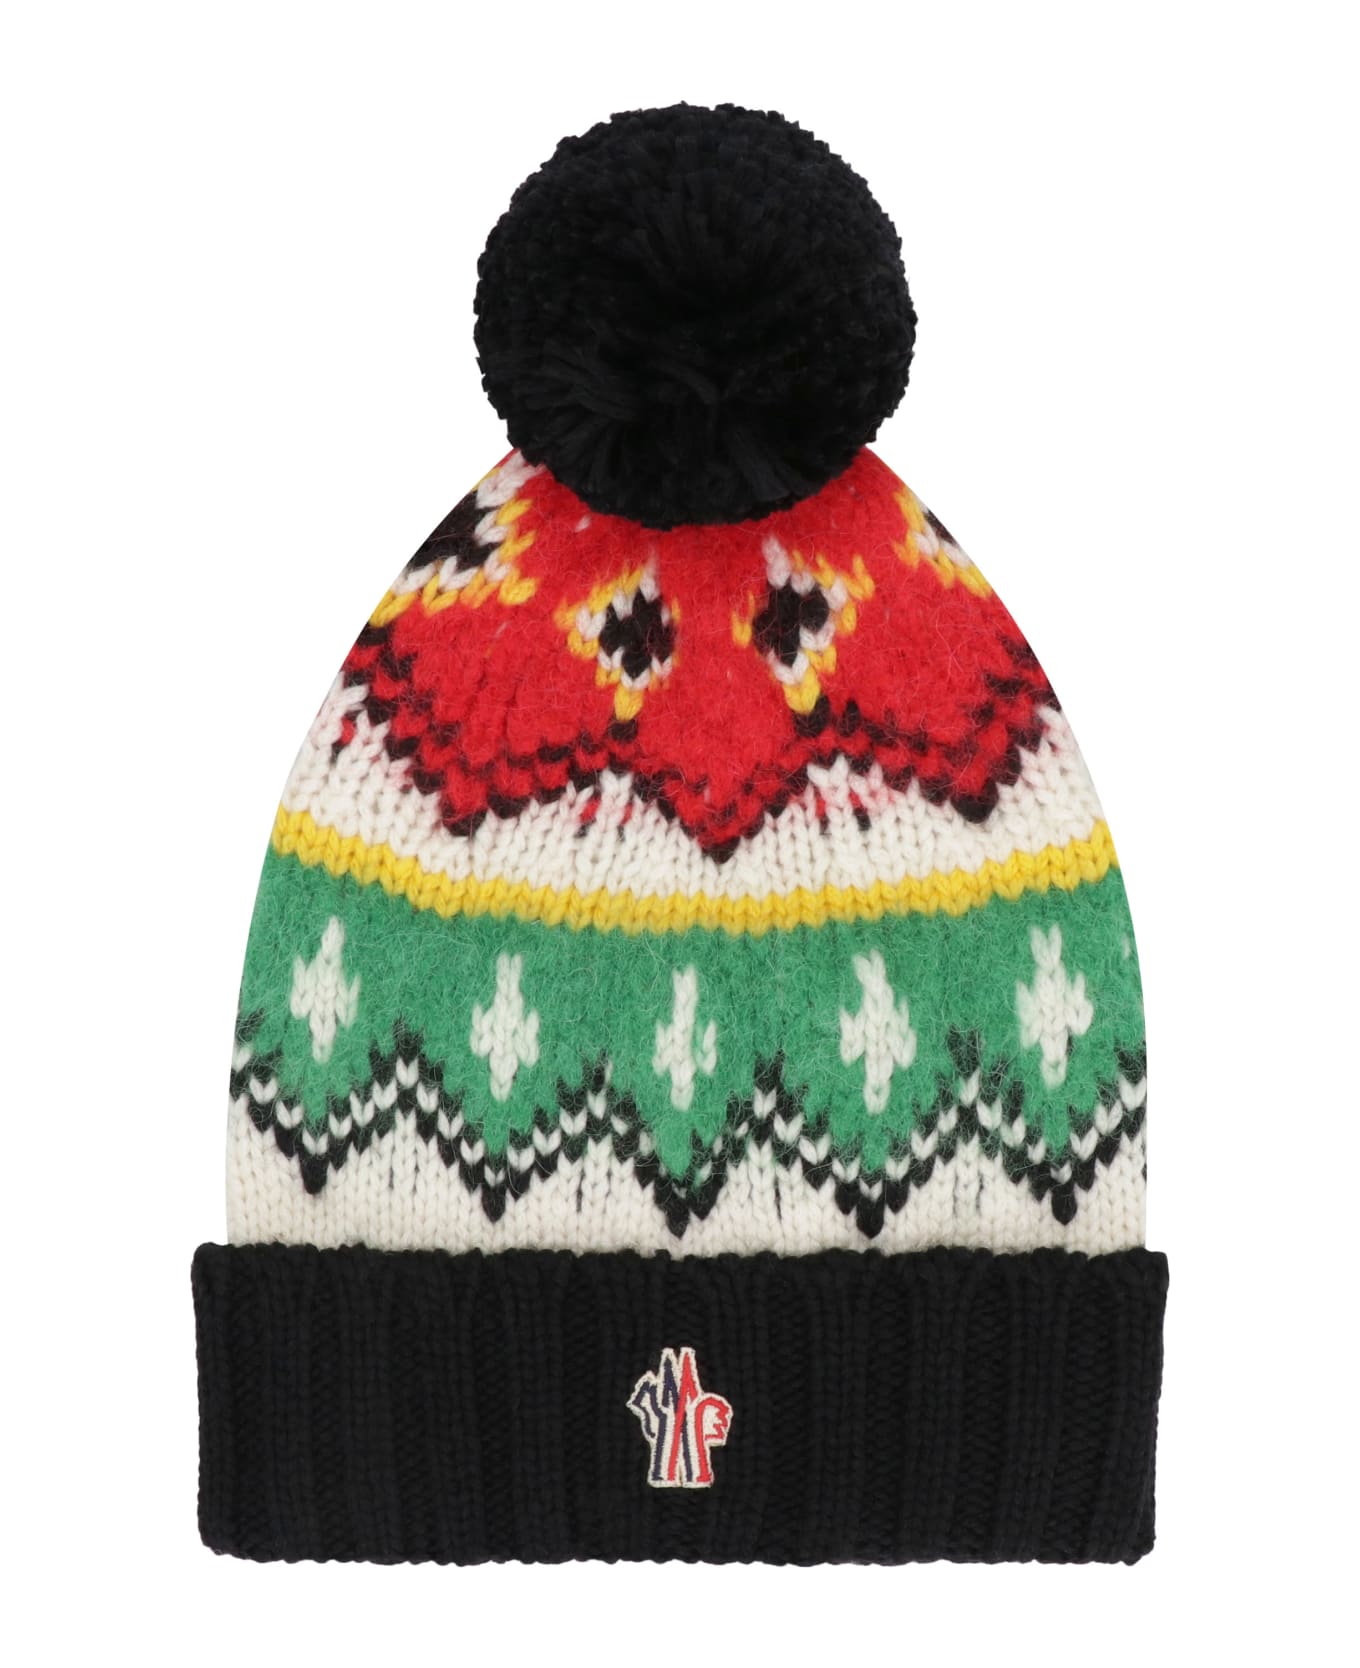 Moncler Grenoble Knitted Wool Hat With Pom-pom - Multicolor 帽子